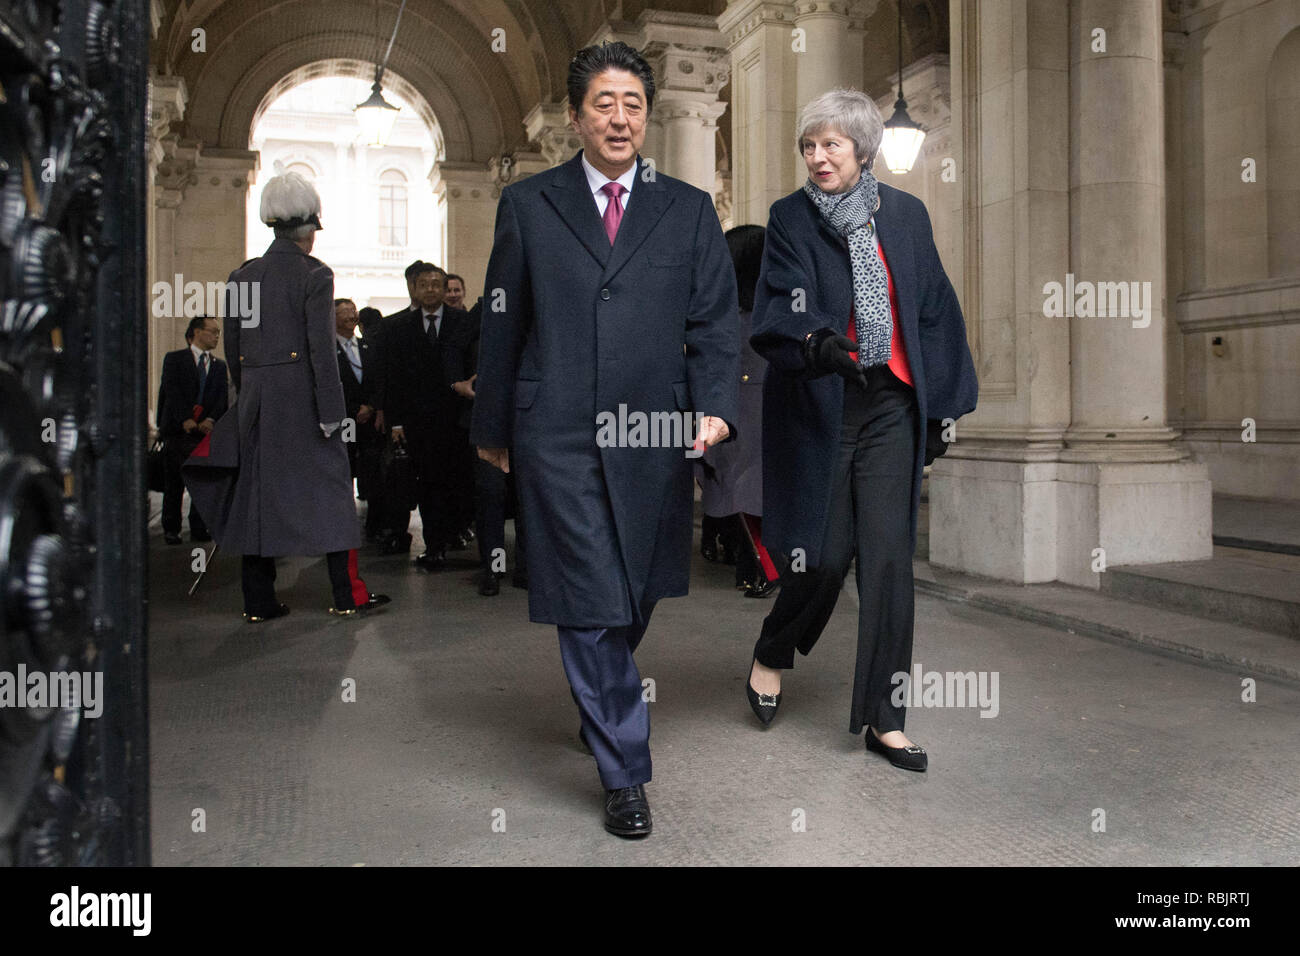 Prime Minister Theresa May and Japanese Prime Minister Shinzo Abe arriving at Downing Street, London ahead of a bilateral meeting. Stock Photo